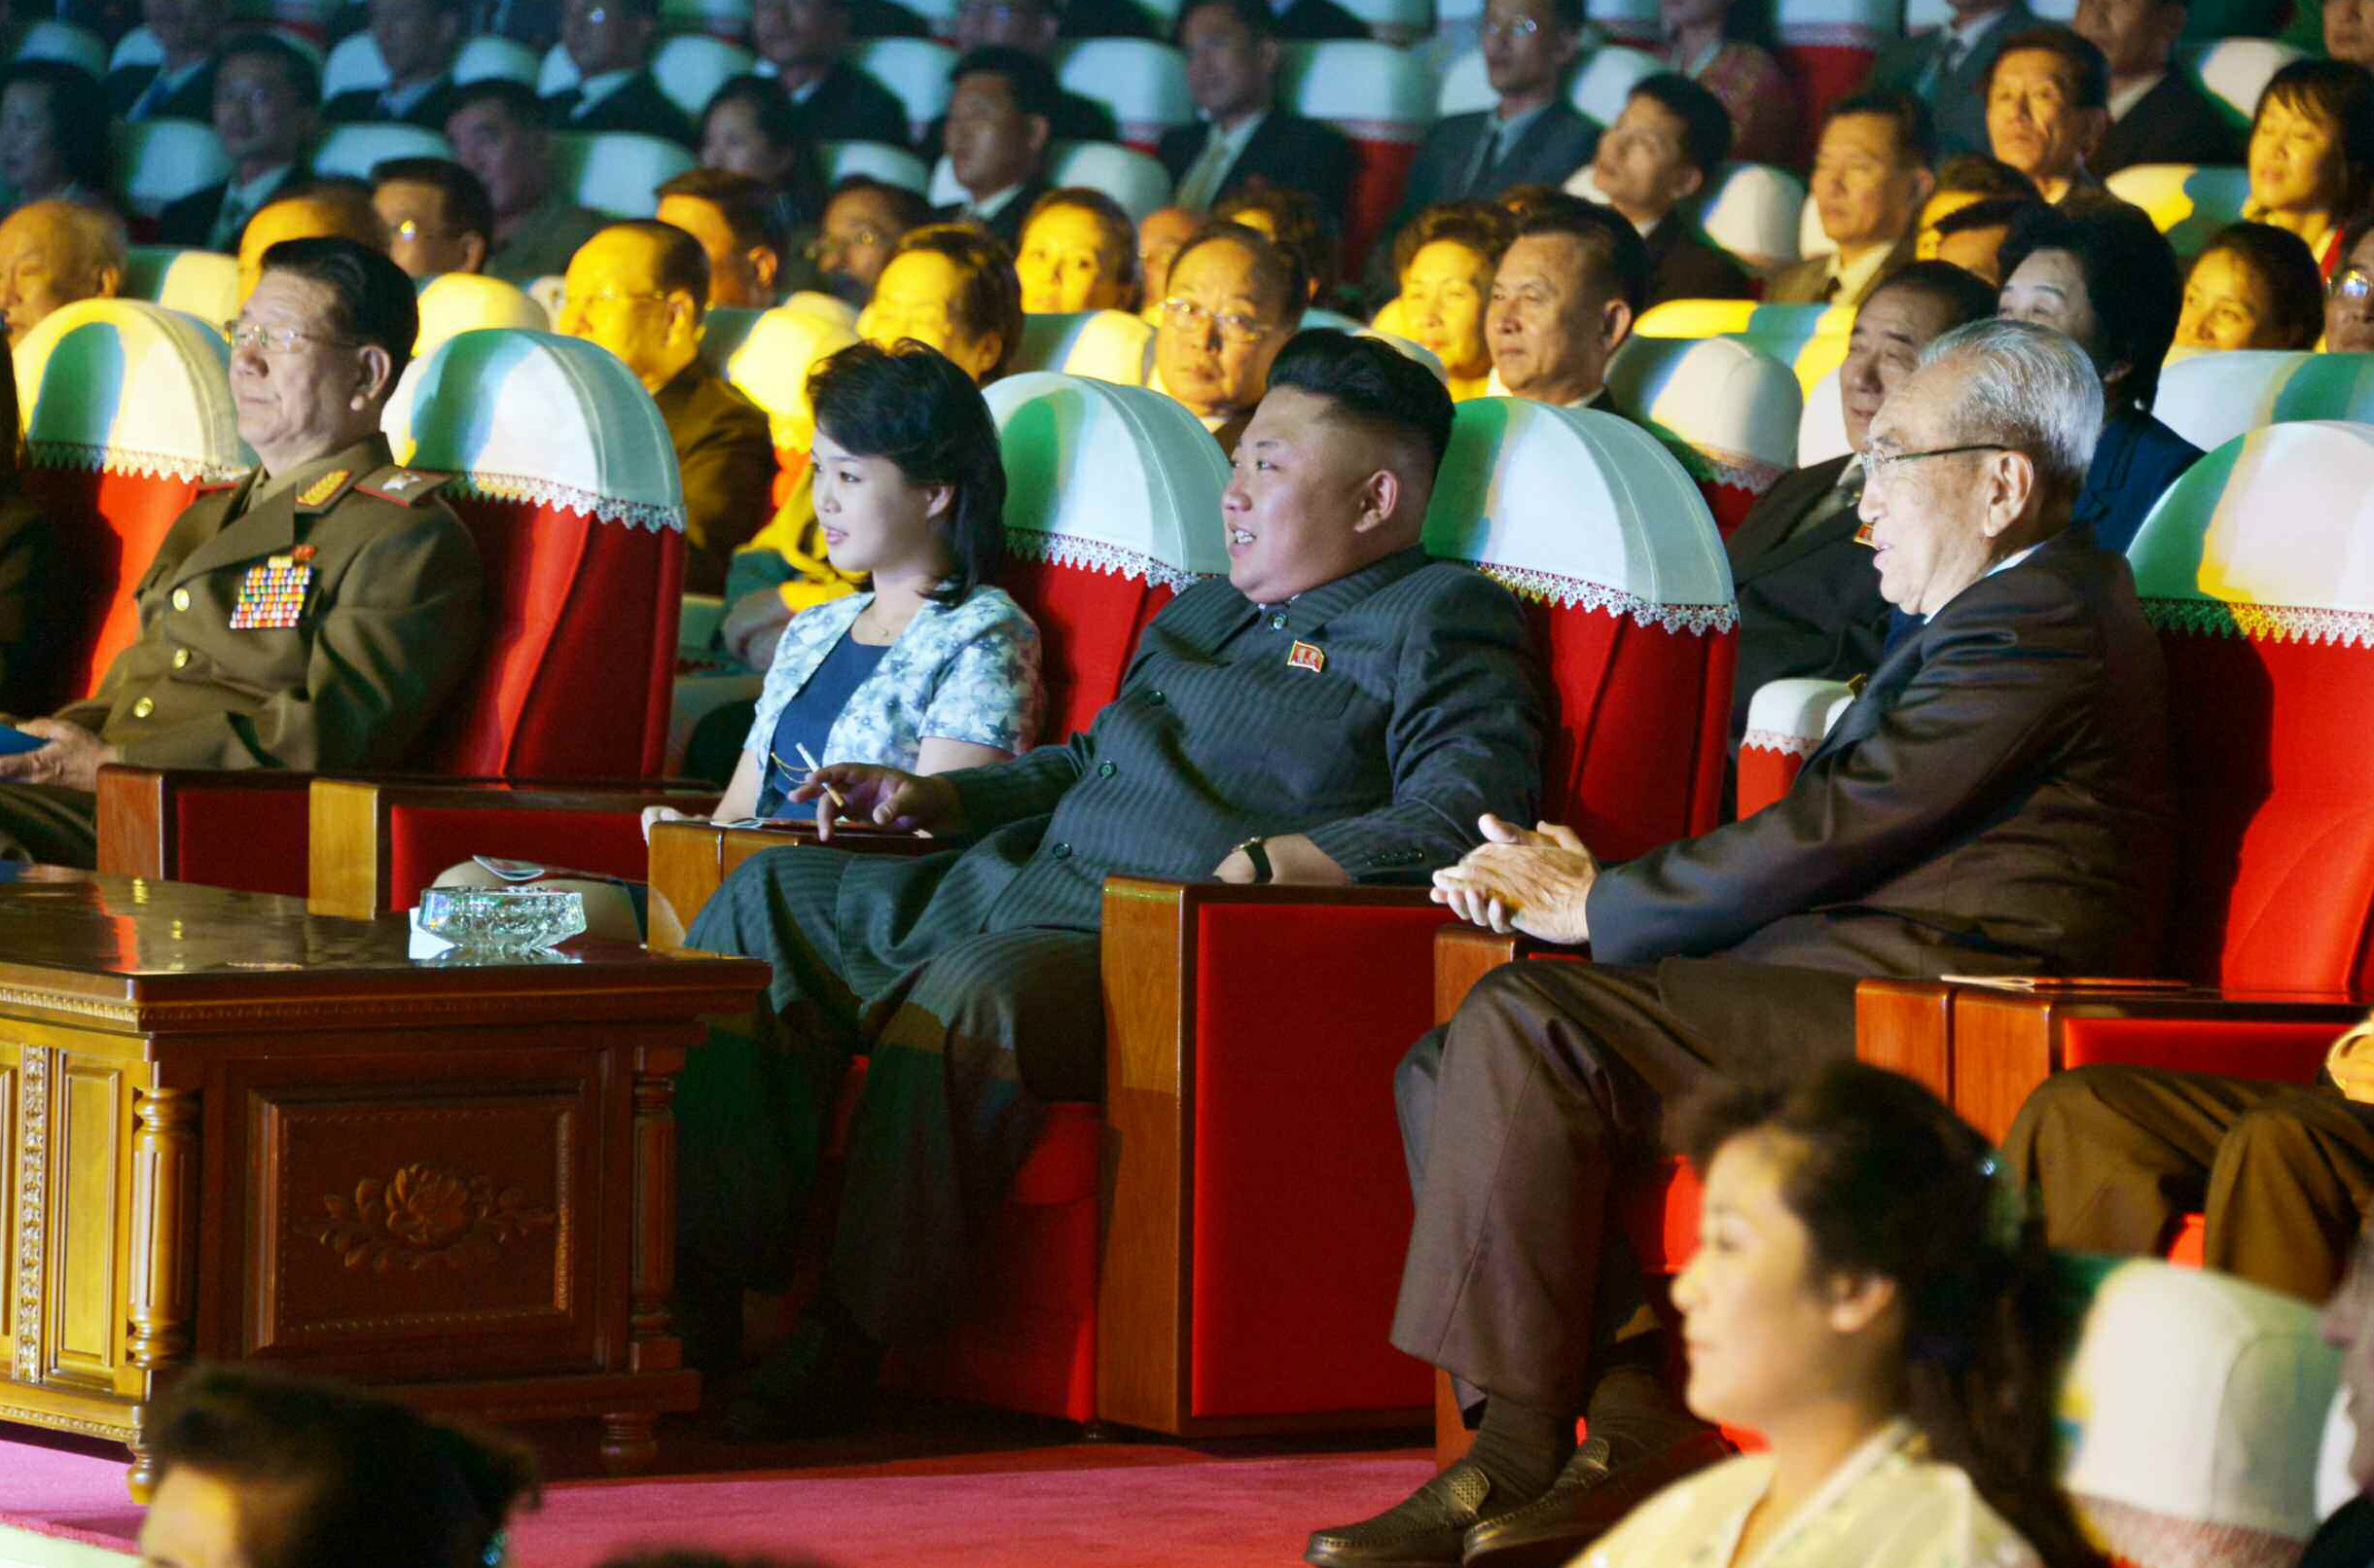 PHOTO: North Korean leader Kim Jong-un and his wife, Ri Sol-ju, watch a performance by the Moranbong Band in Pyongyang on Sept. 3, 2014.